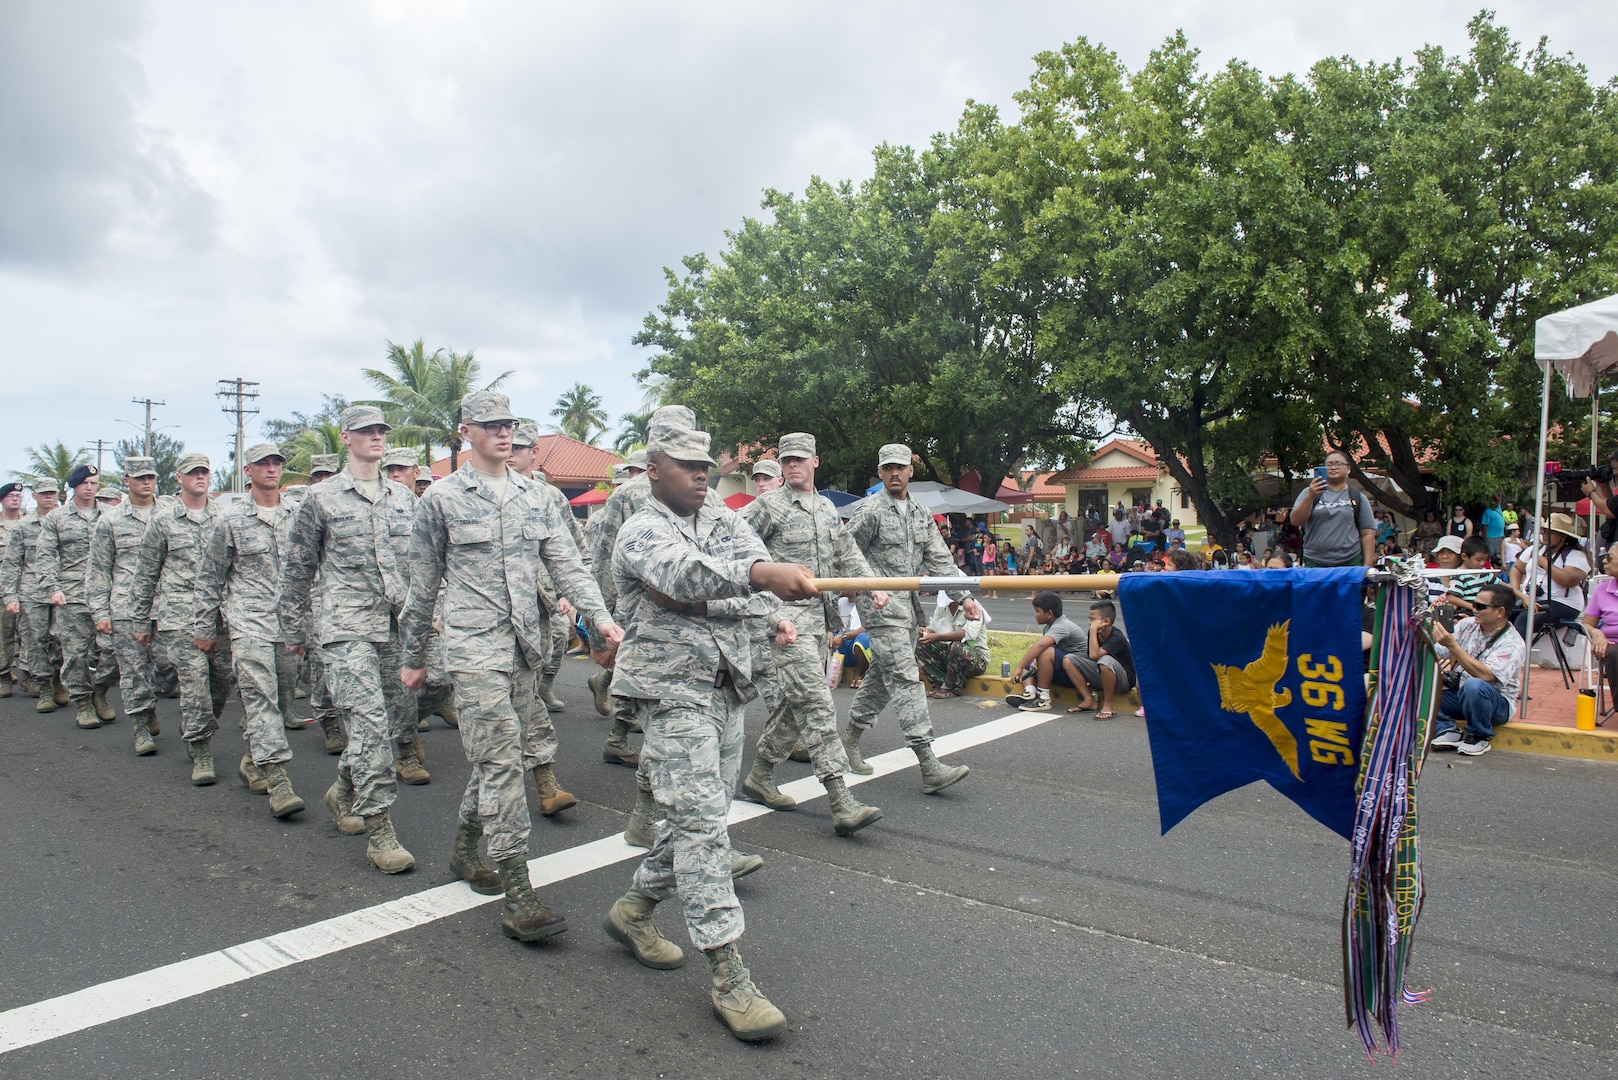 U.S. Airmen from the 36th Wing march in the 73rd Guam Liberation Day parade July 21, 2017, in Hagåtña, Guam. The parade commemorated 73 years since U.S. armed forces liberated the island from Japanese occupation. During World War II, Japan seized Guam on December 10, 1941, and on July 21, 1944, the U.S. armed forces liberated the island. (U.S. Air Force photo by Airman 1st Class Christopher Quail)